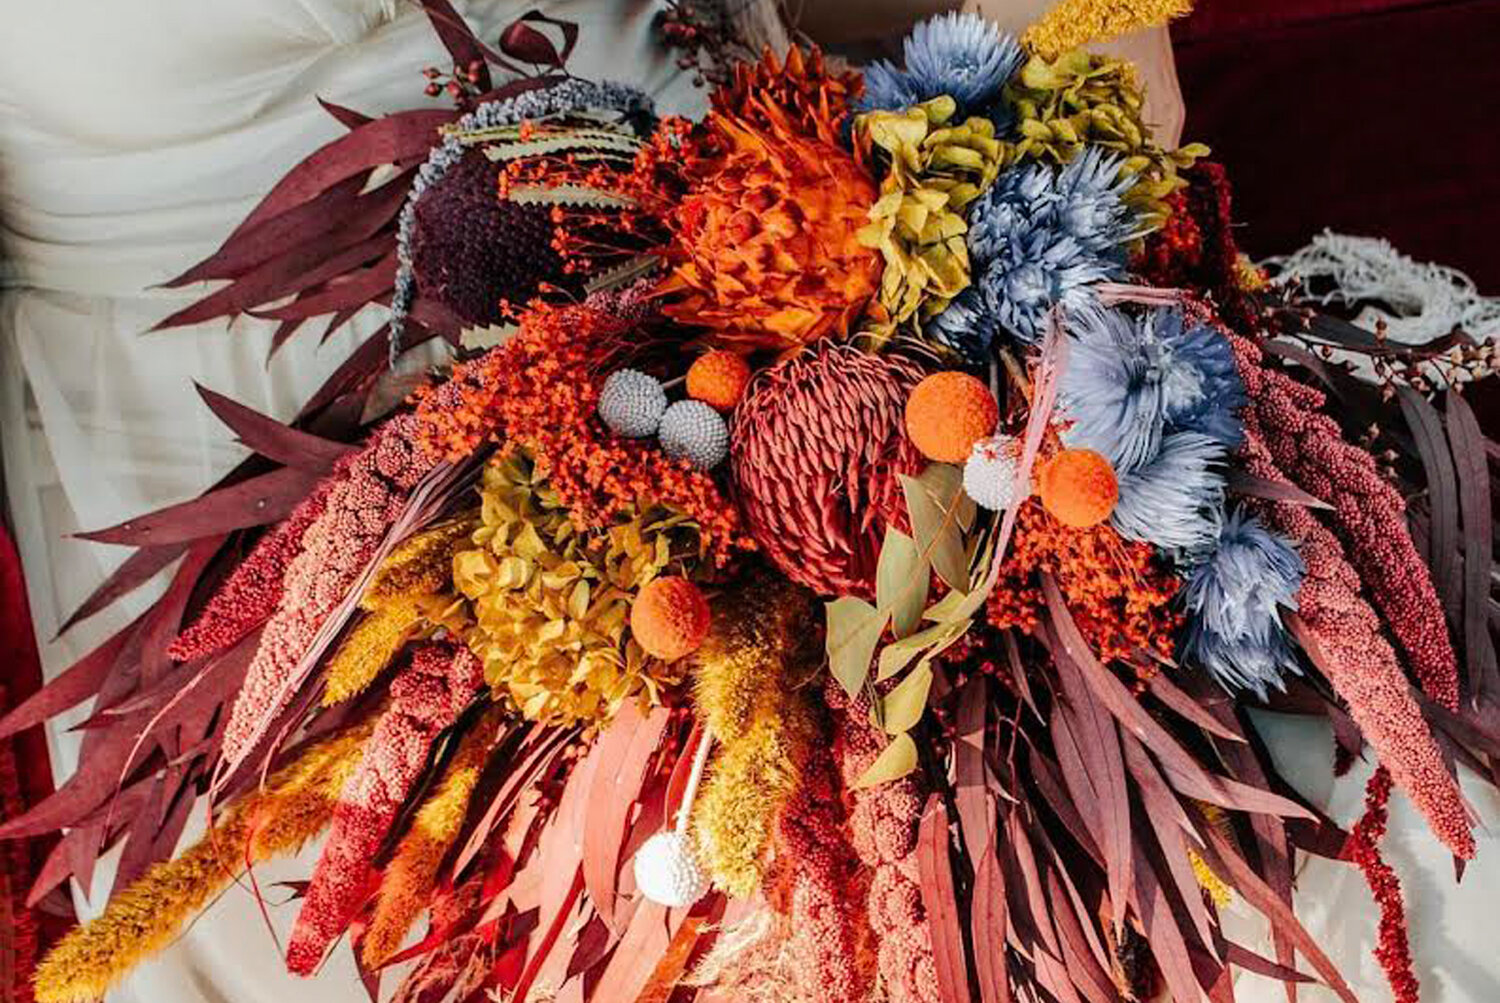 Dried flowers are given fresh attitude at Eden